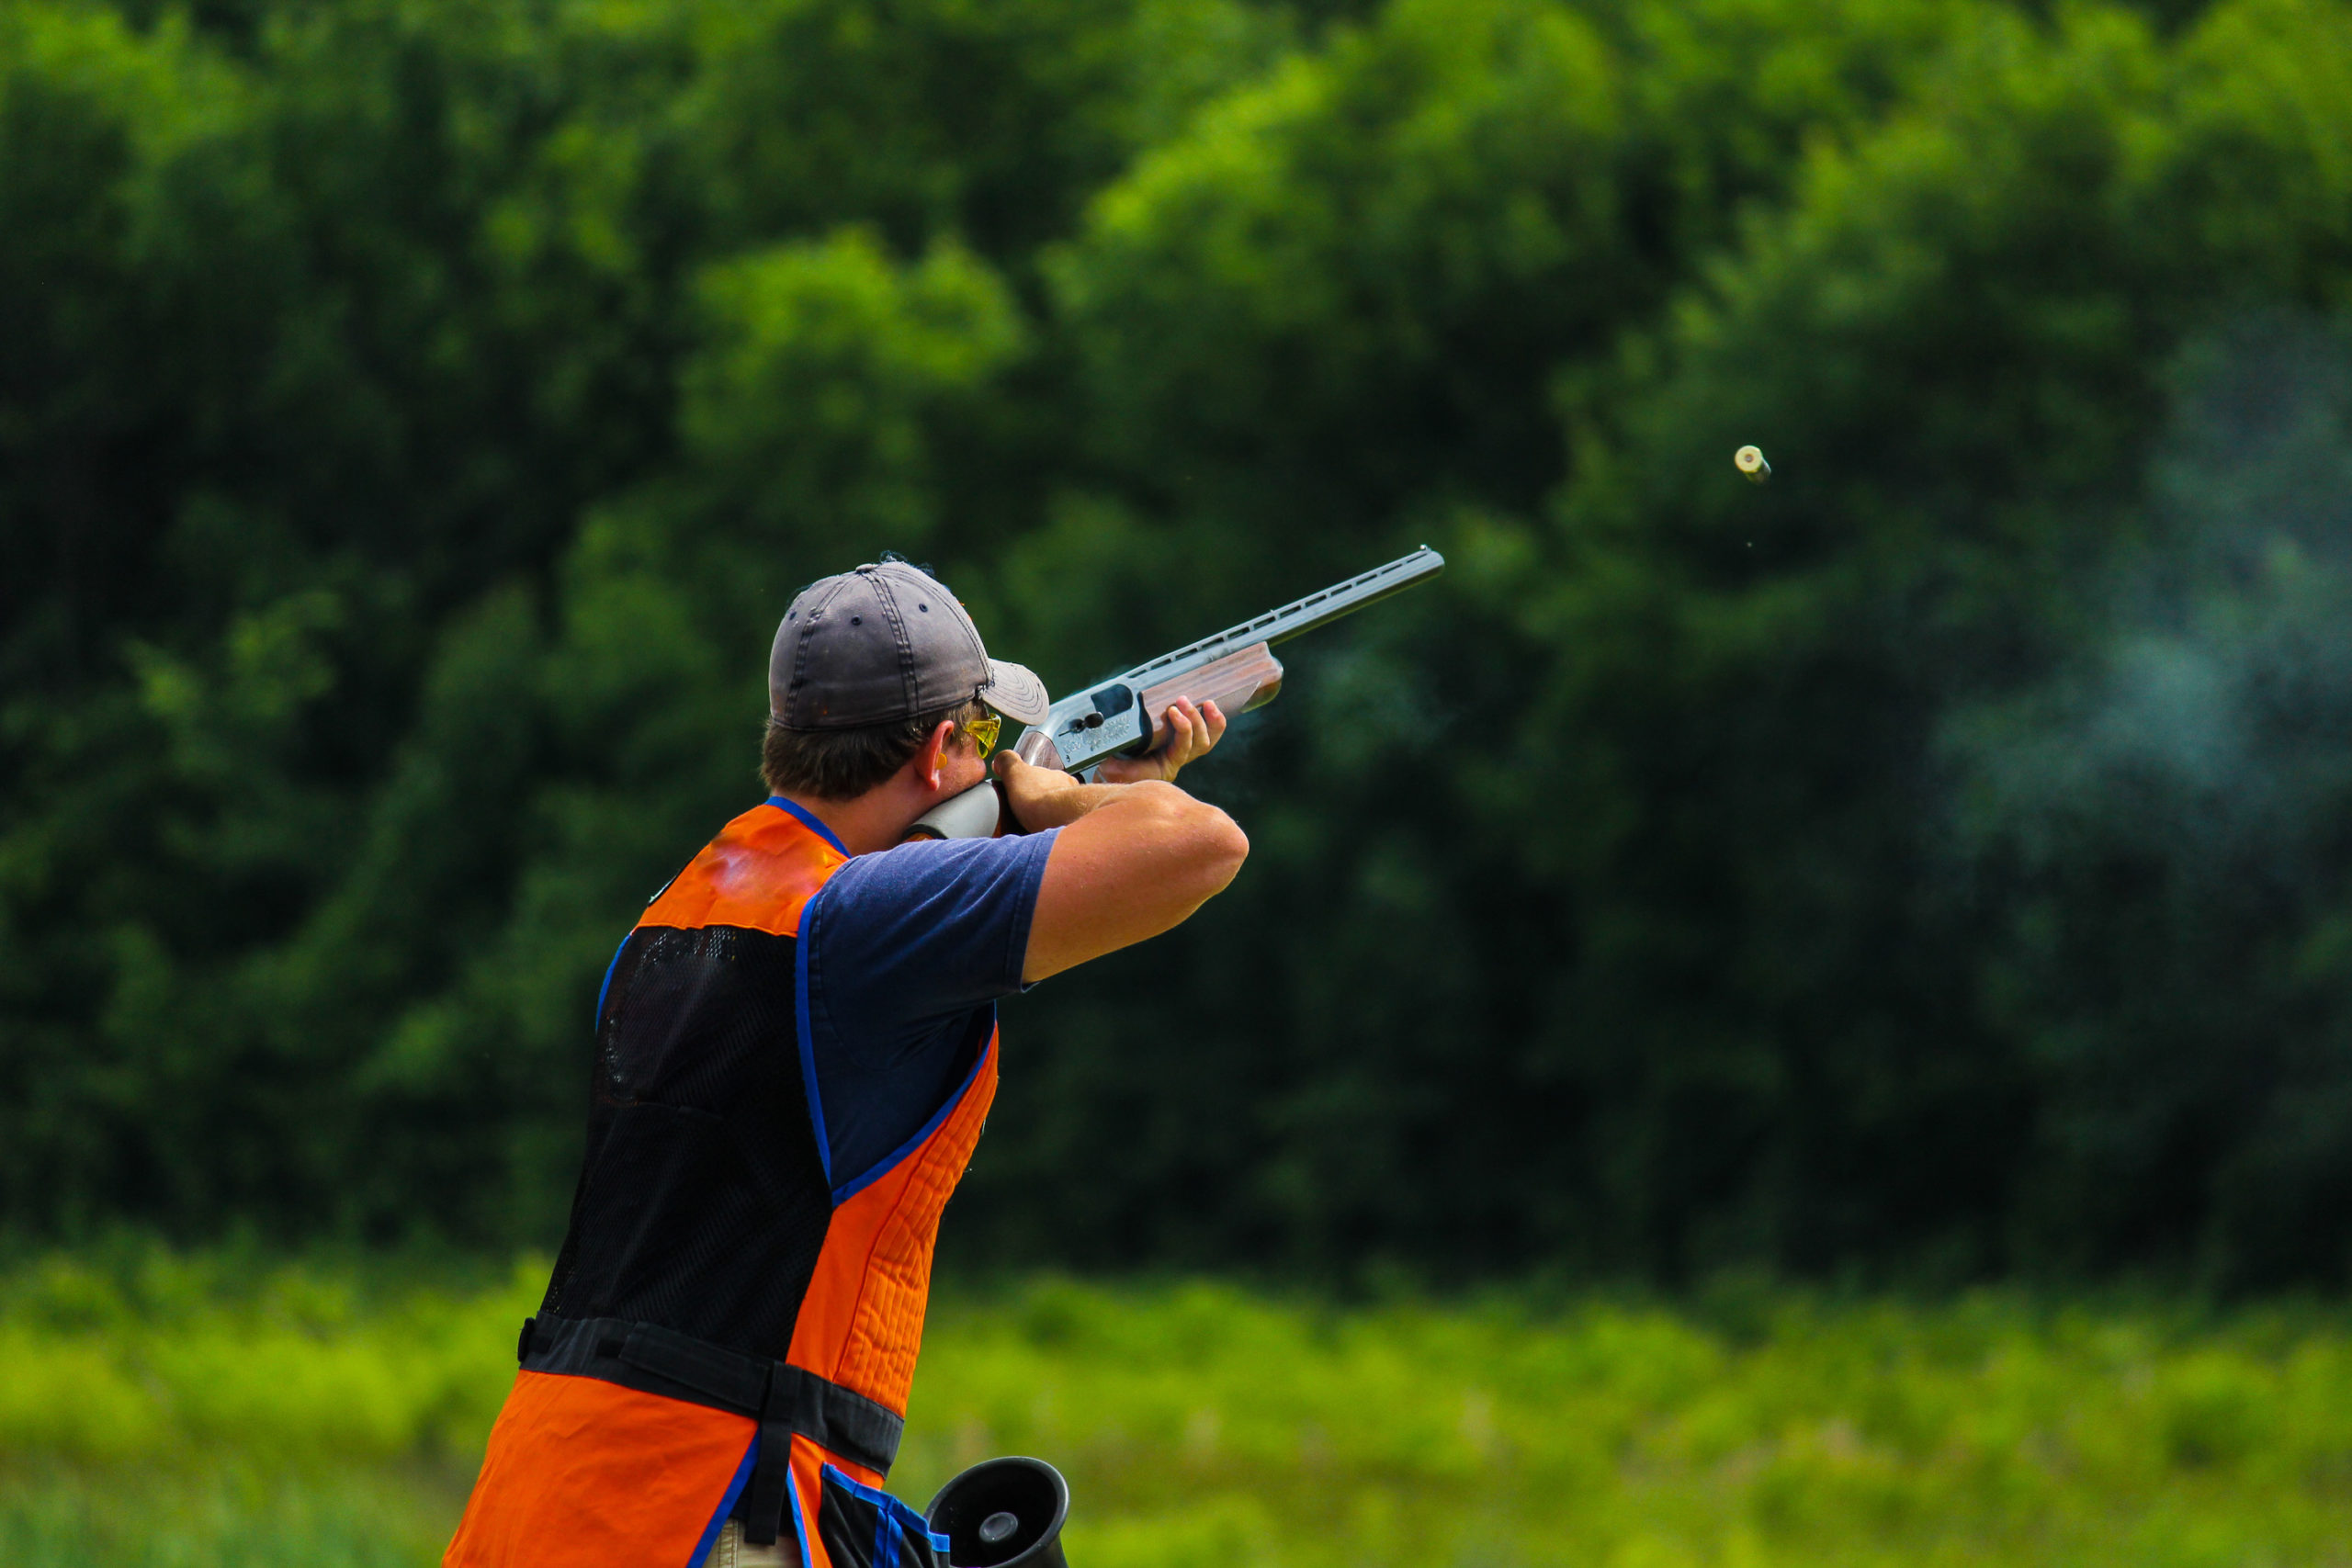 clay pigeon shooting